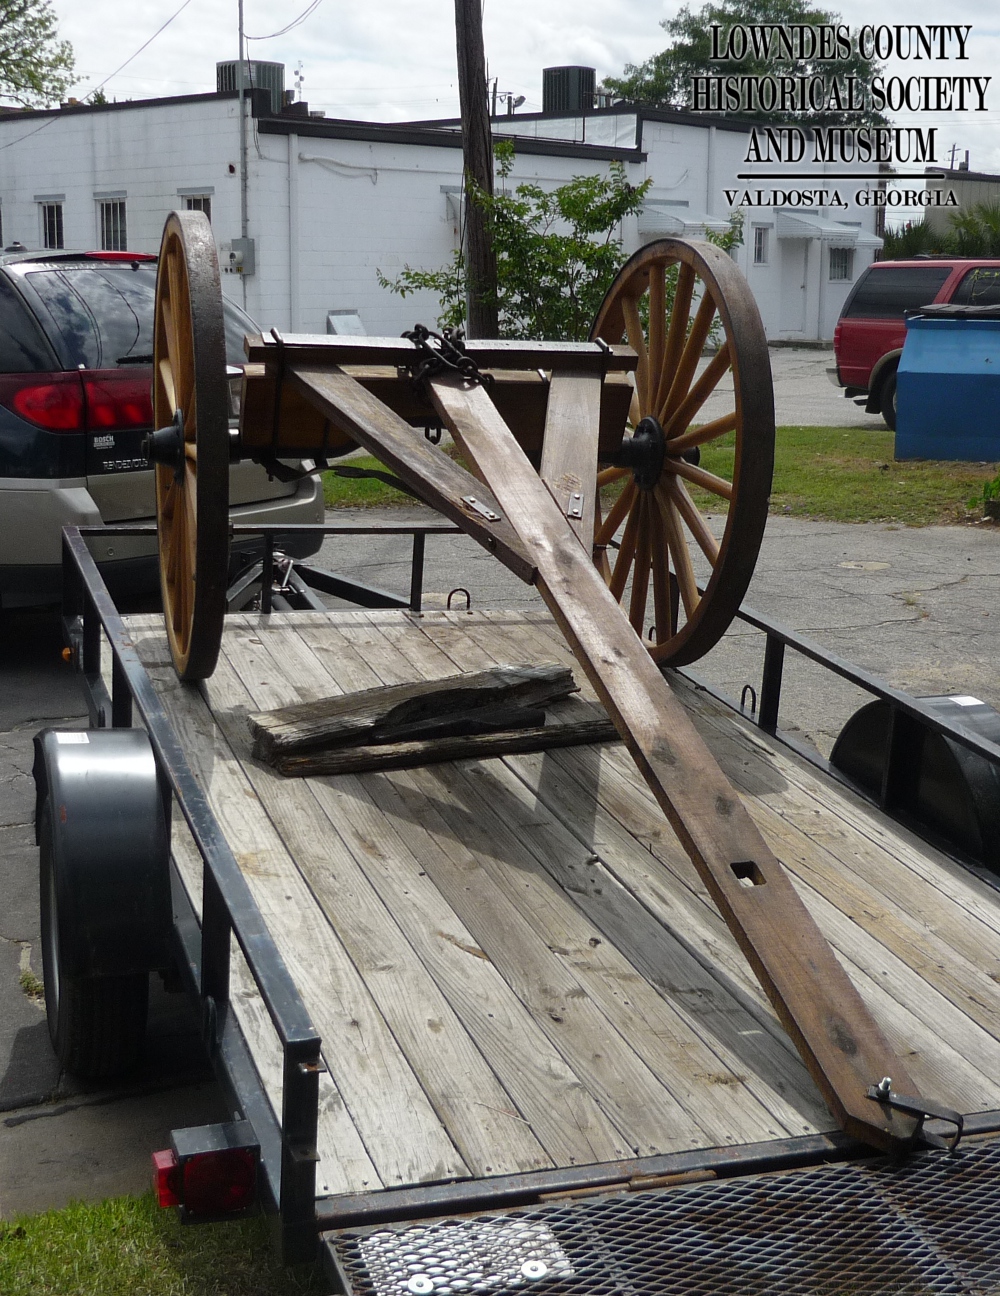 The restored log cart returning to the museum